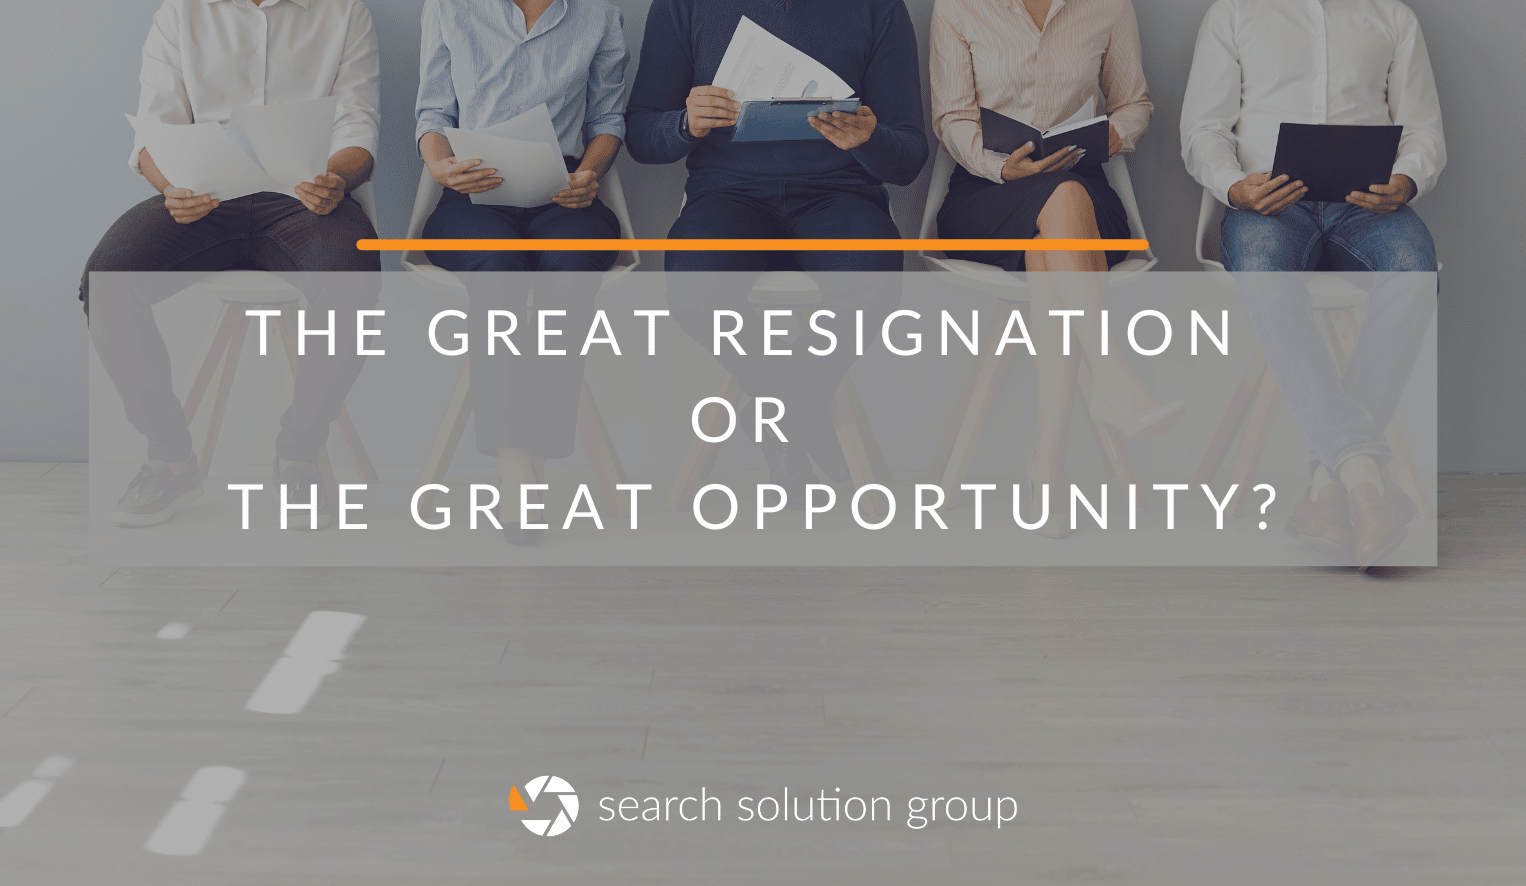 A Positive Spin on the Great Resignation